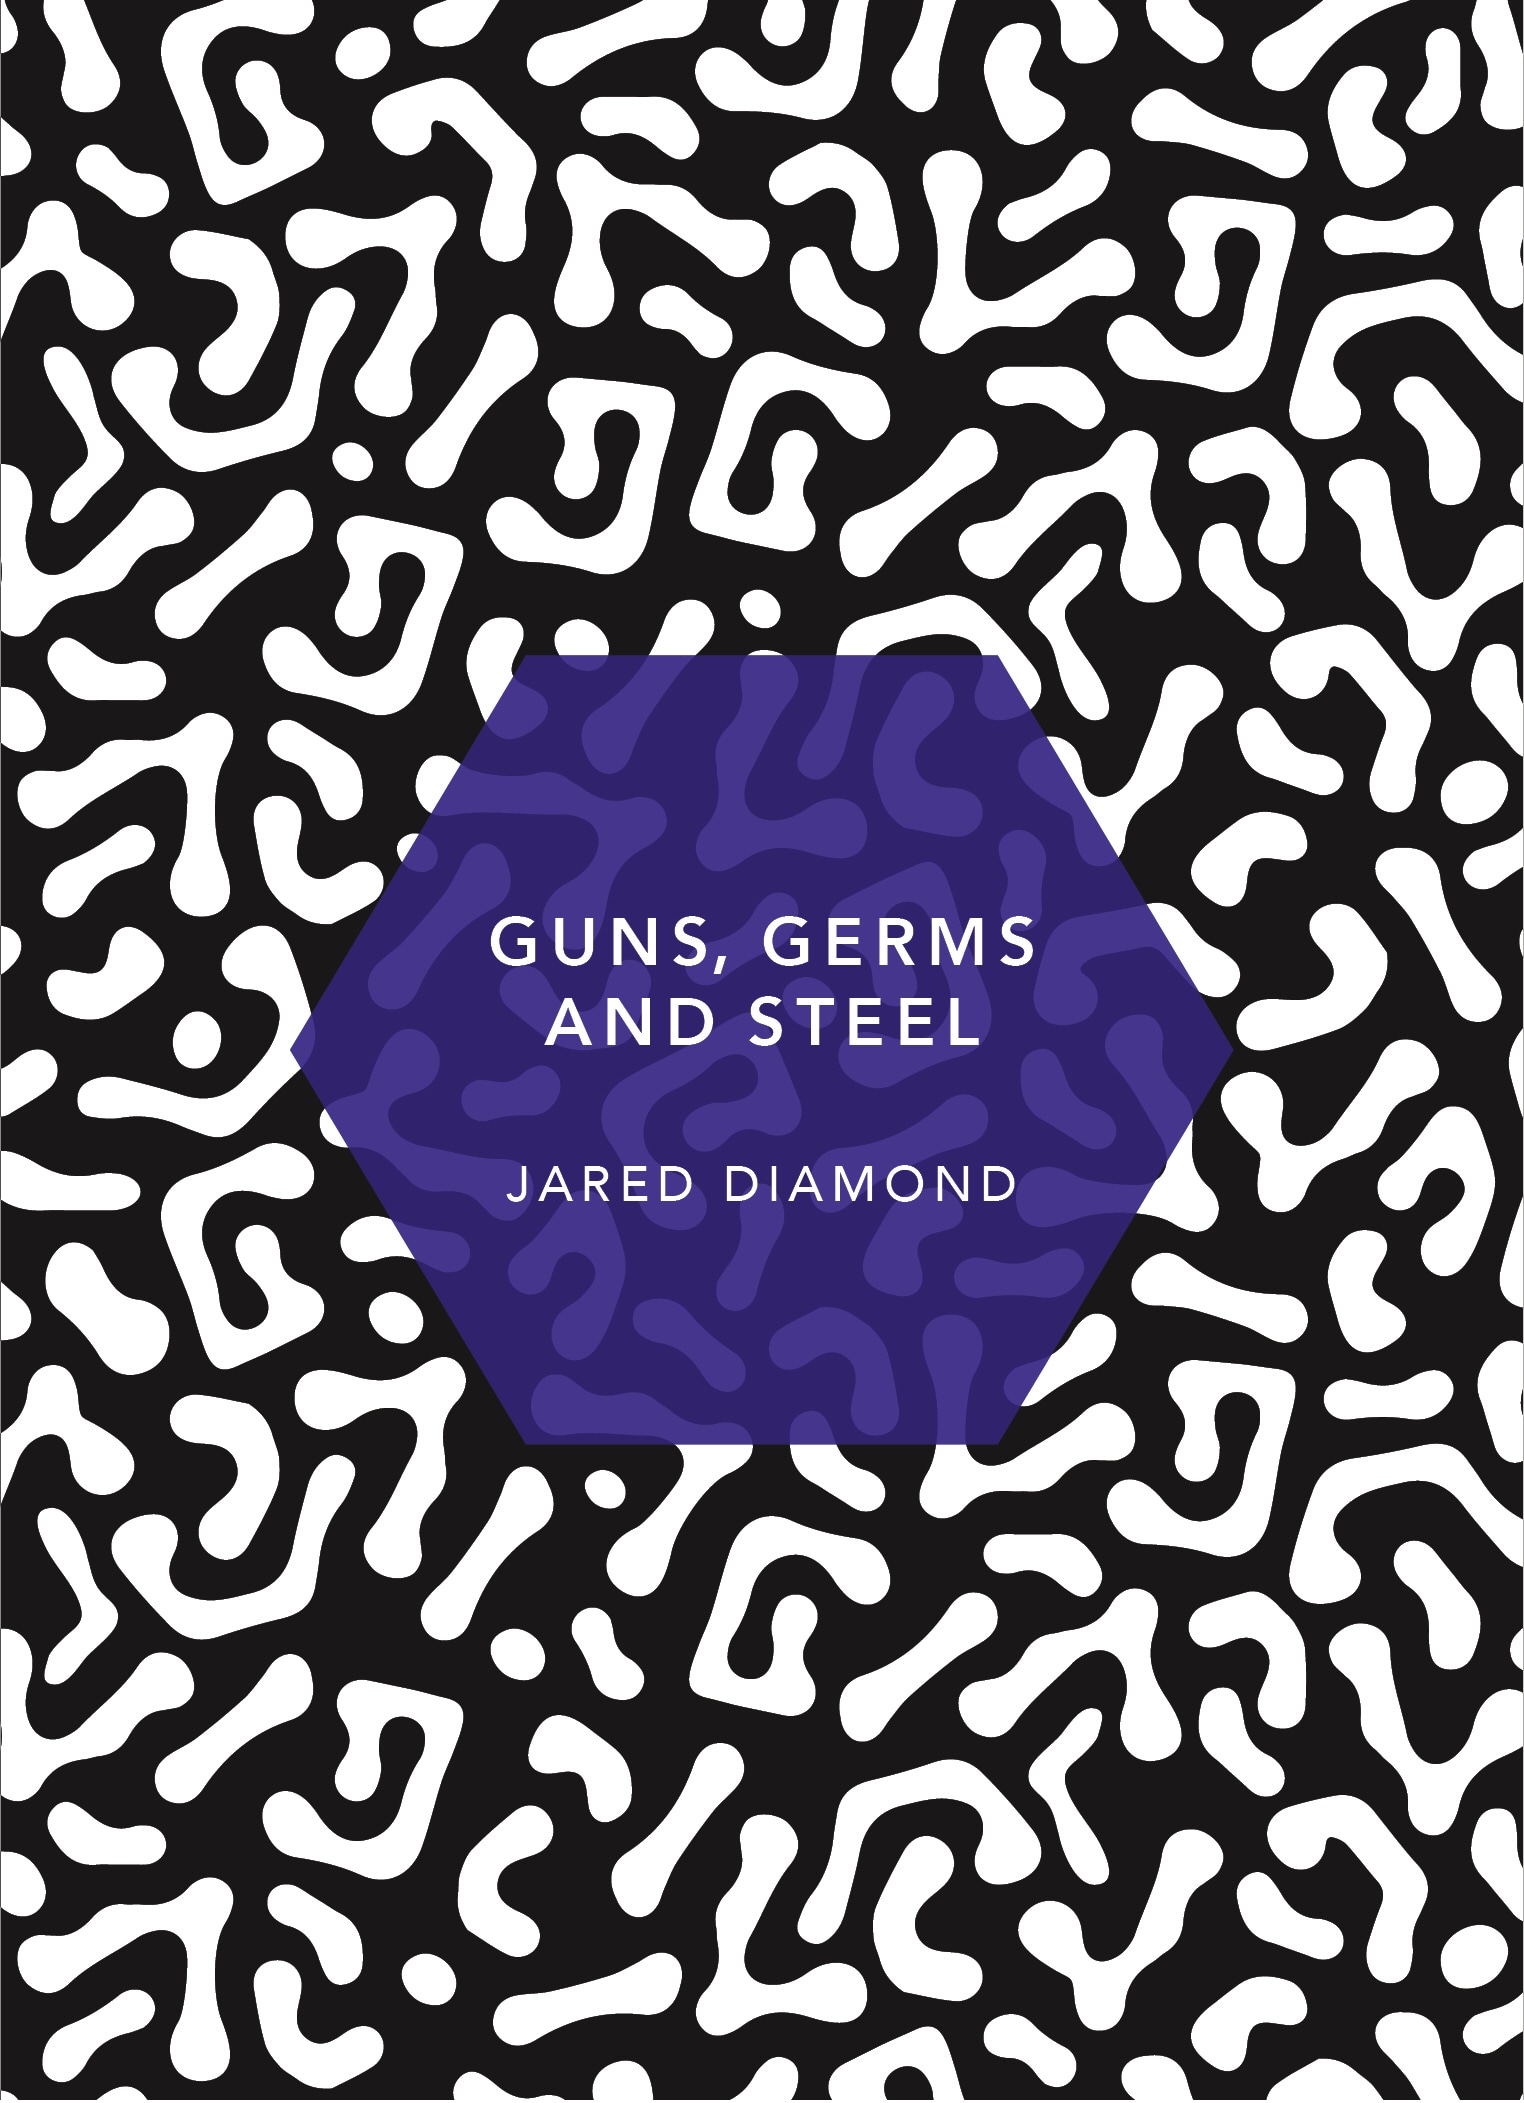 Book “Guns, Germs and Steel” by Jared Diamond — January 10, 2019